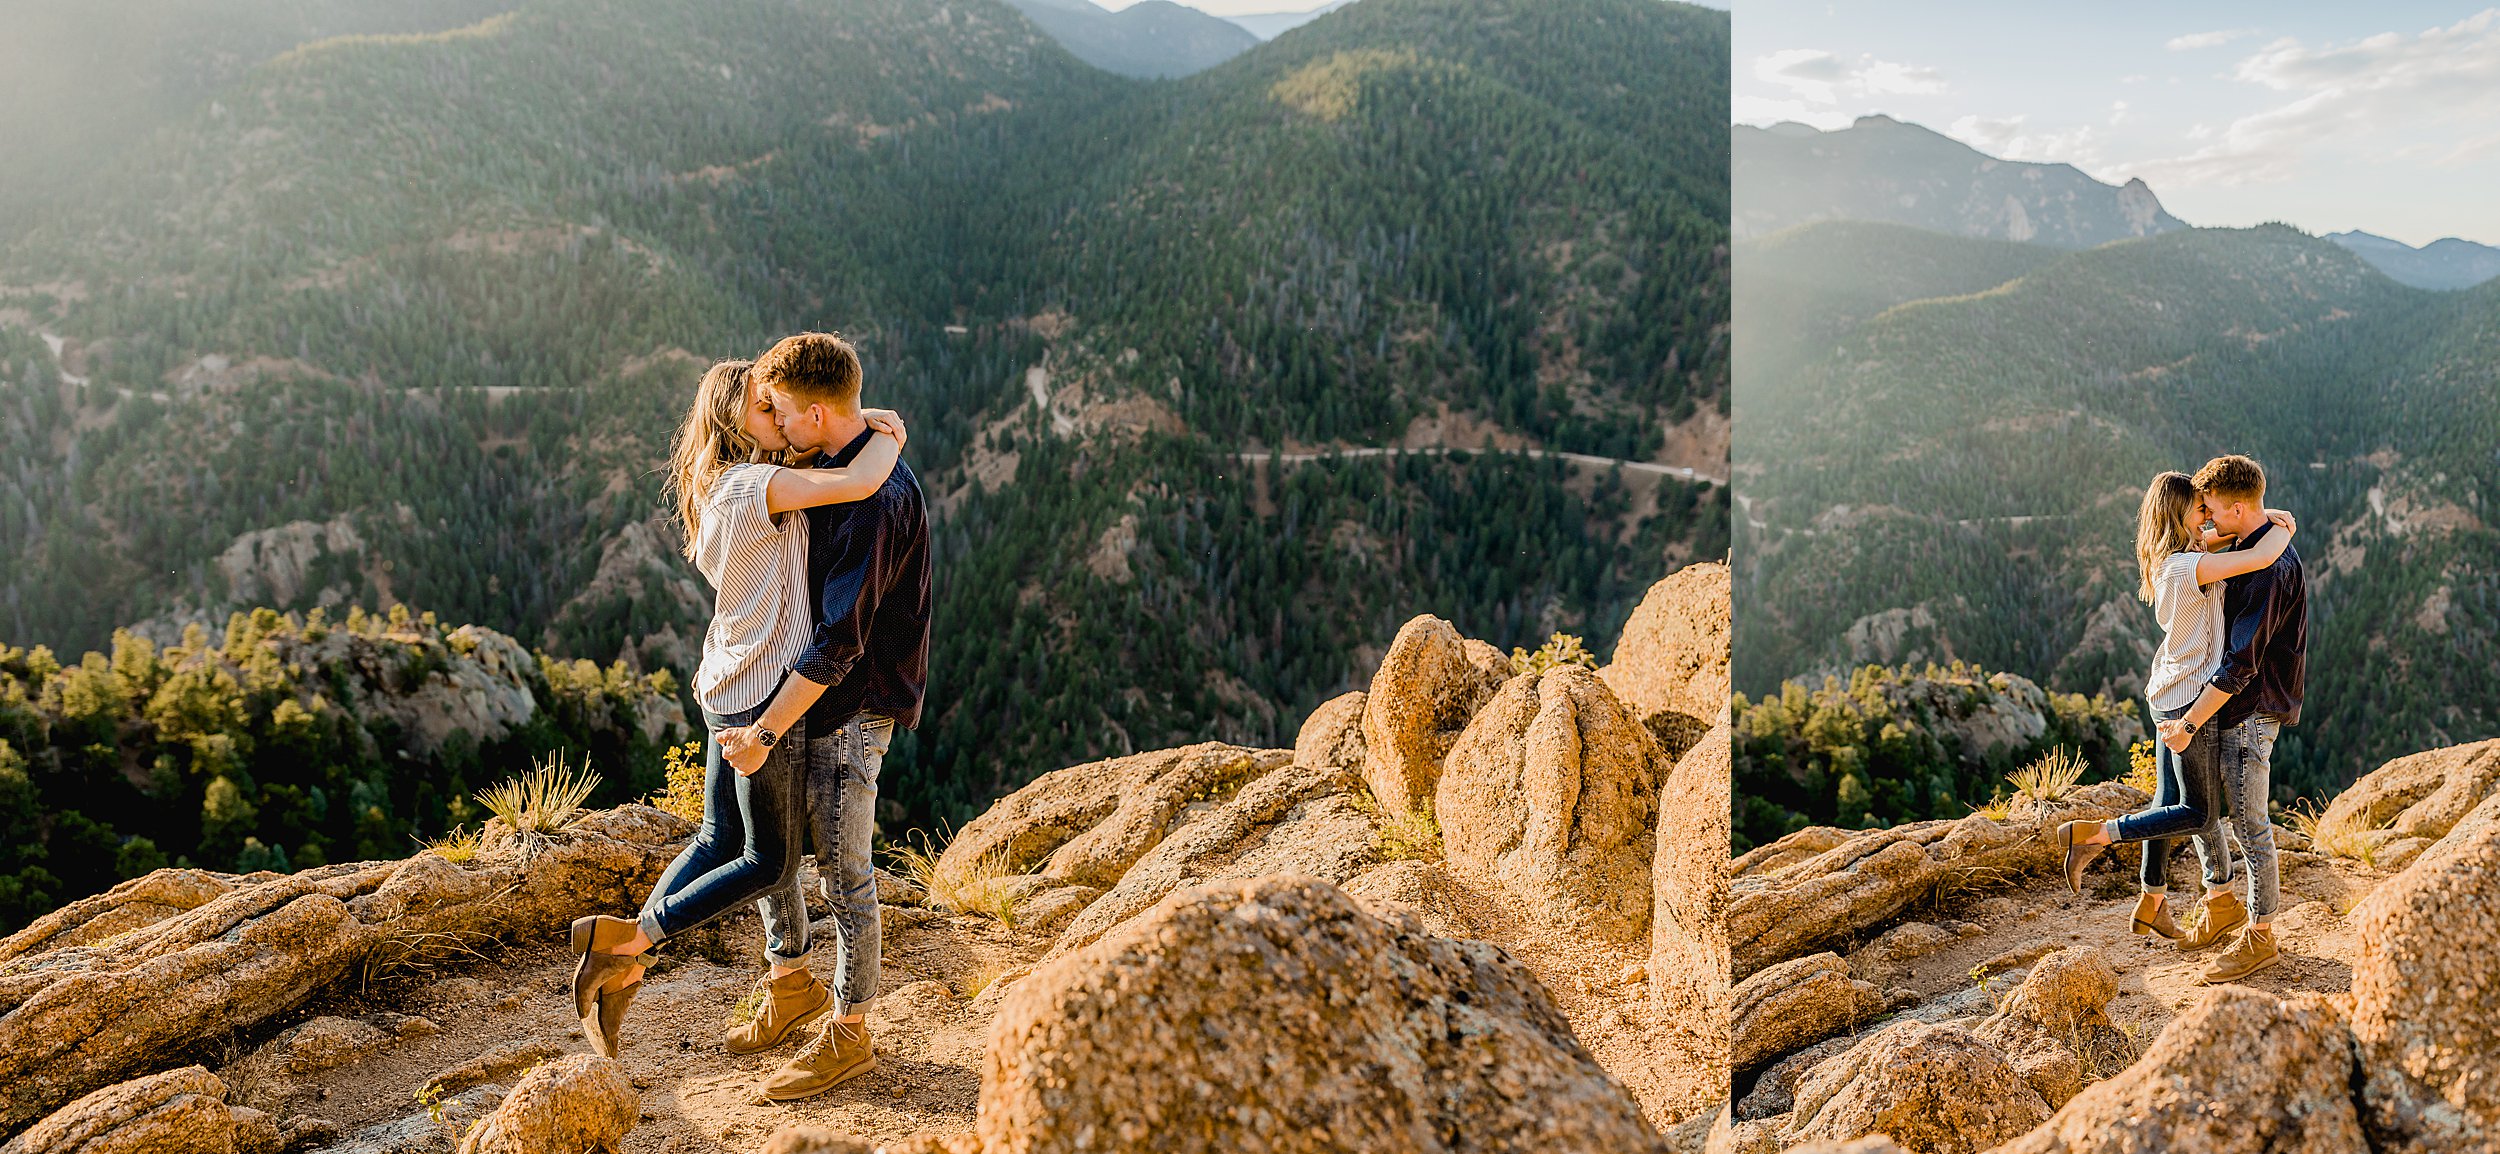 colorado engagement photographer photographs a couples mountain engagement photos with gorgeous mountain scenery